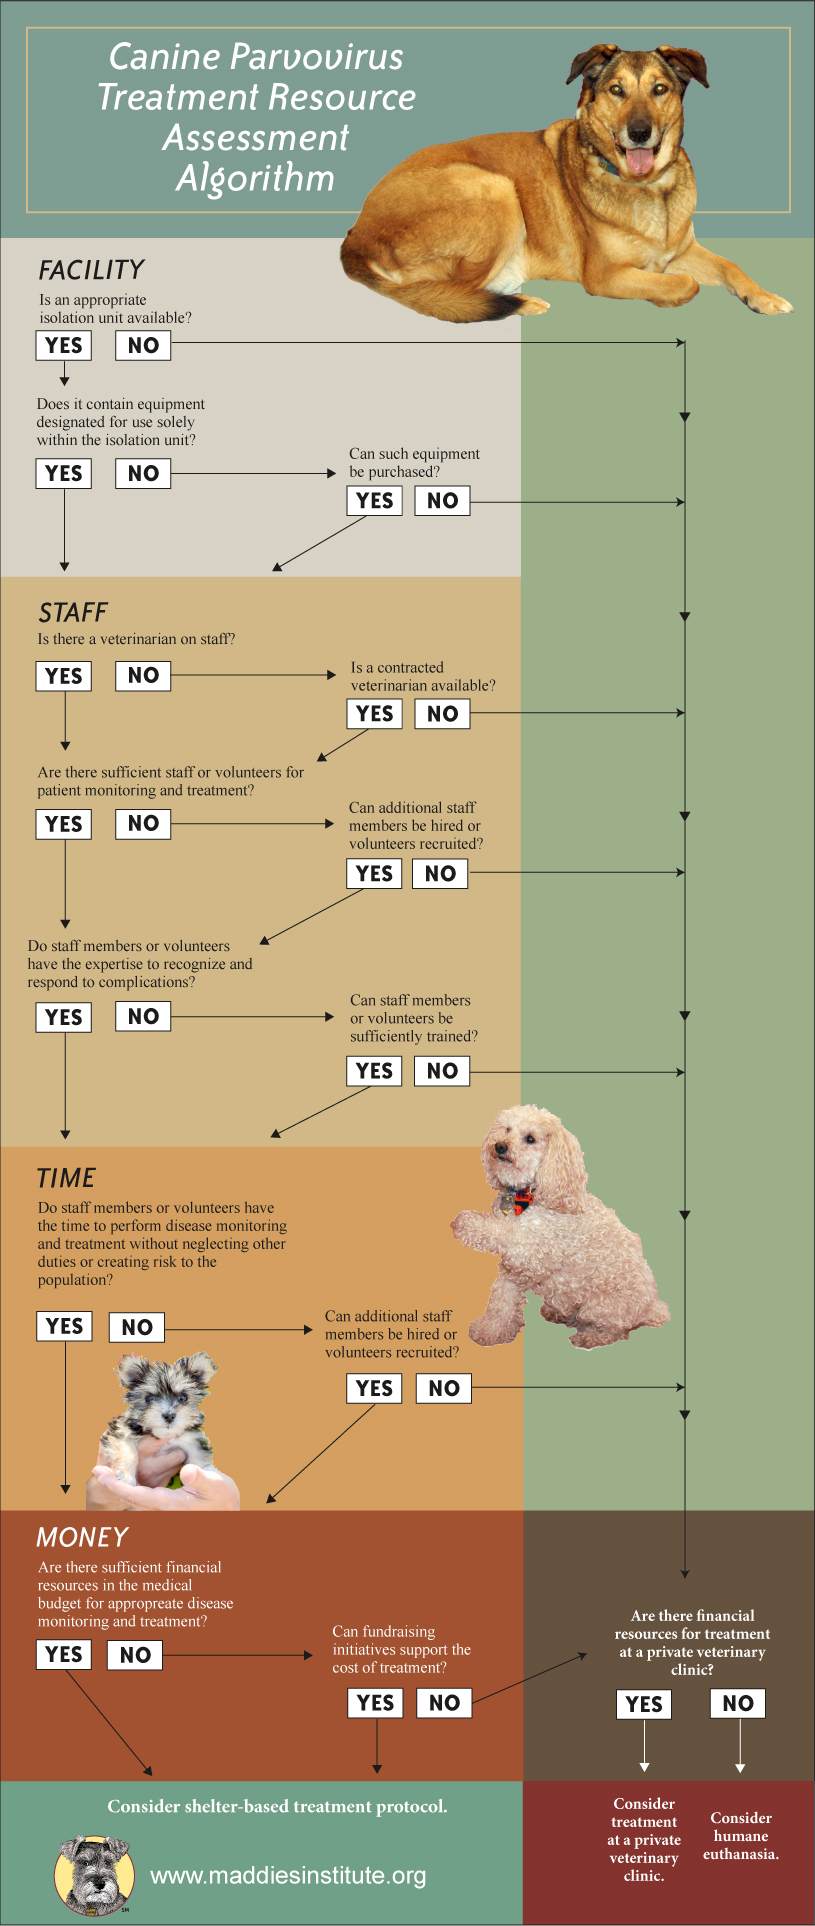 Graphic showing decision making flowchart for the Canine Parvovirus Treatment Resource Assessment Algorithm